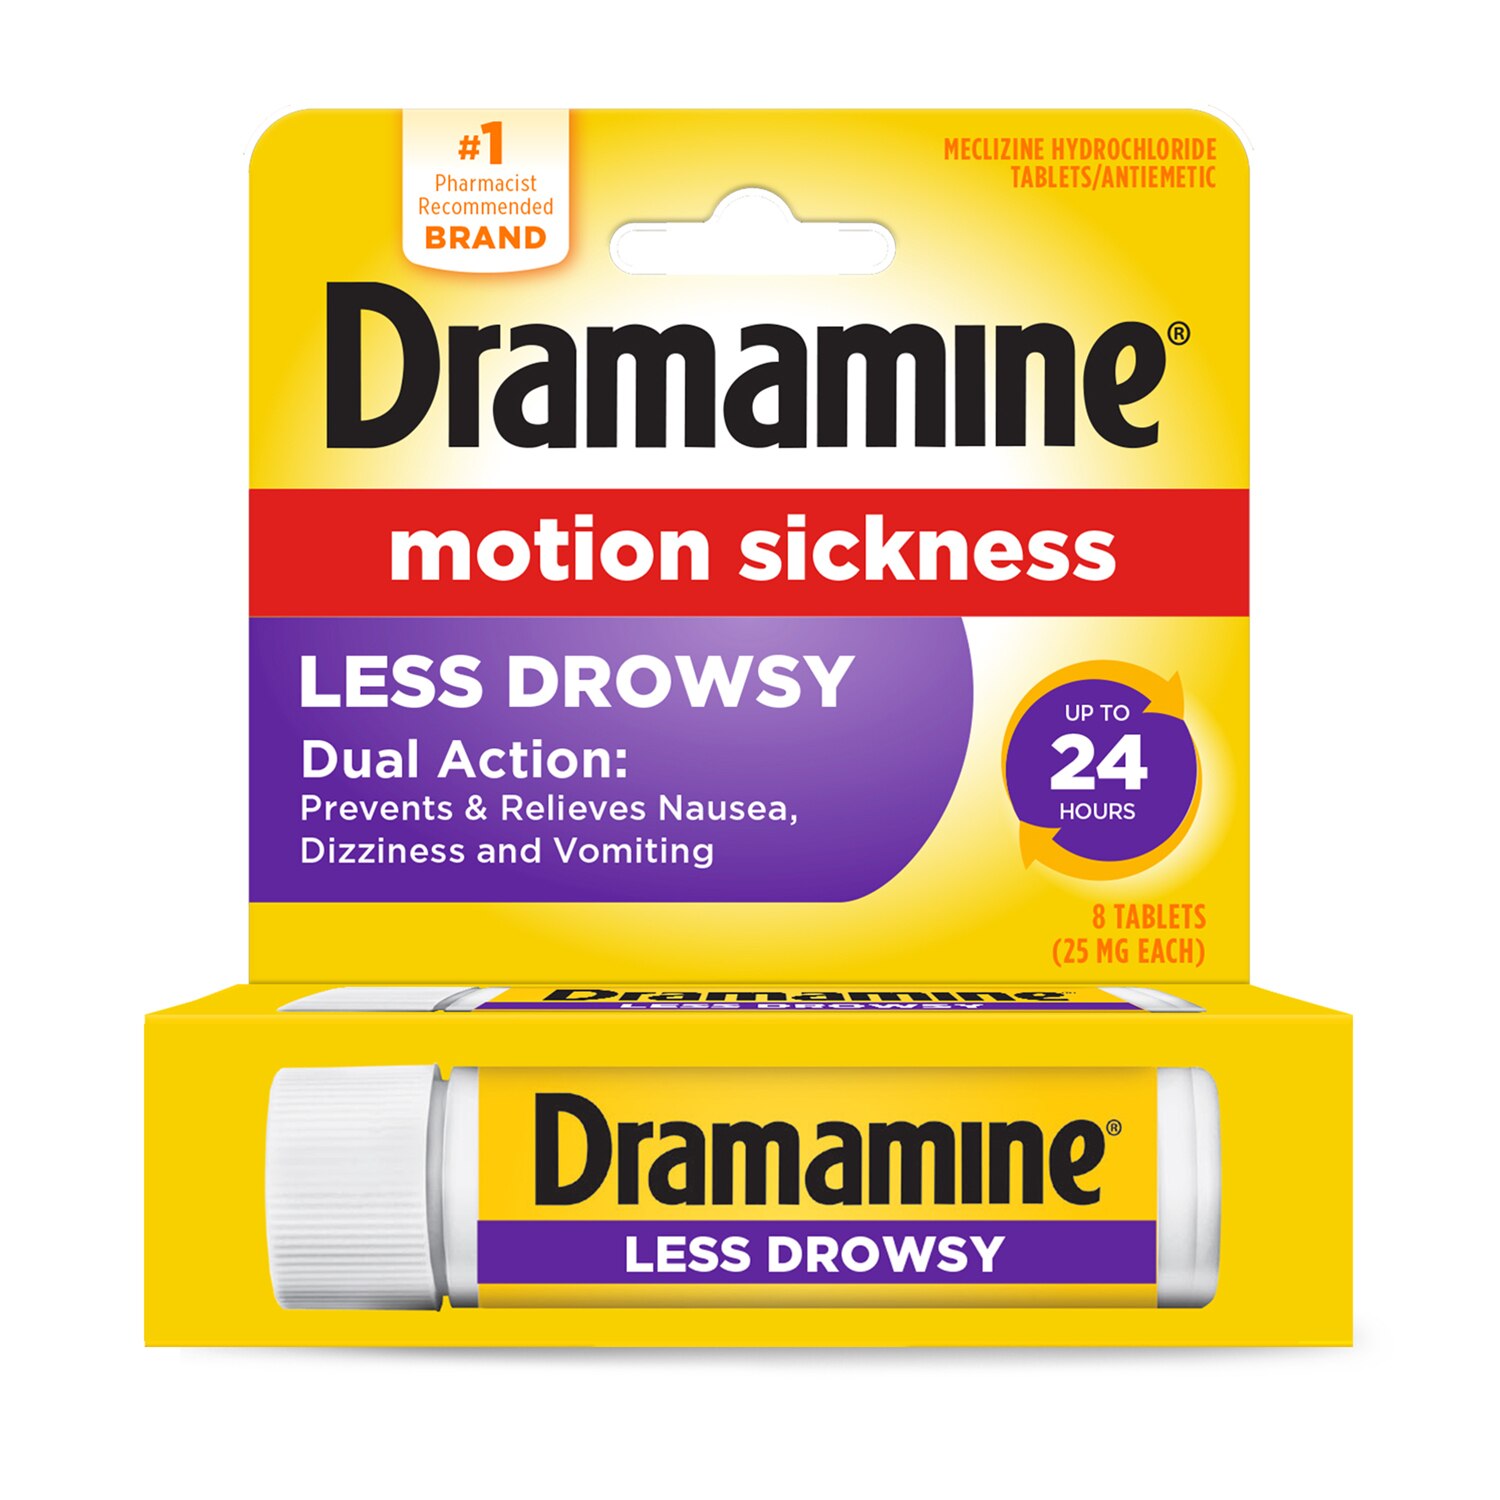 Dramamine Motion Sickness Less Drowsy Tablets, 8 CT